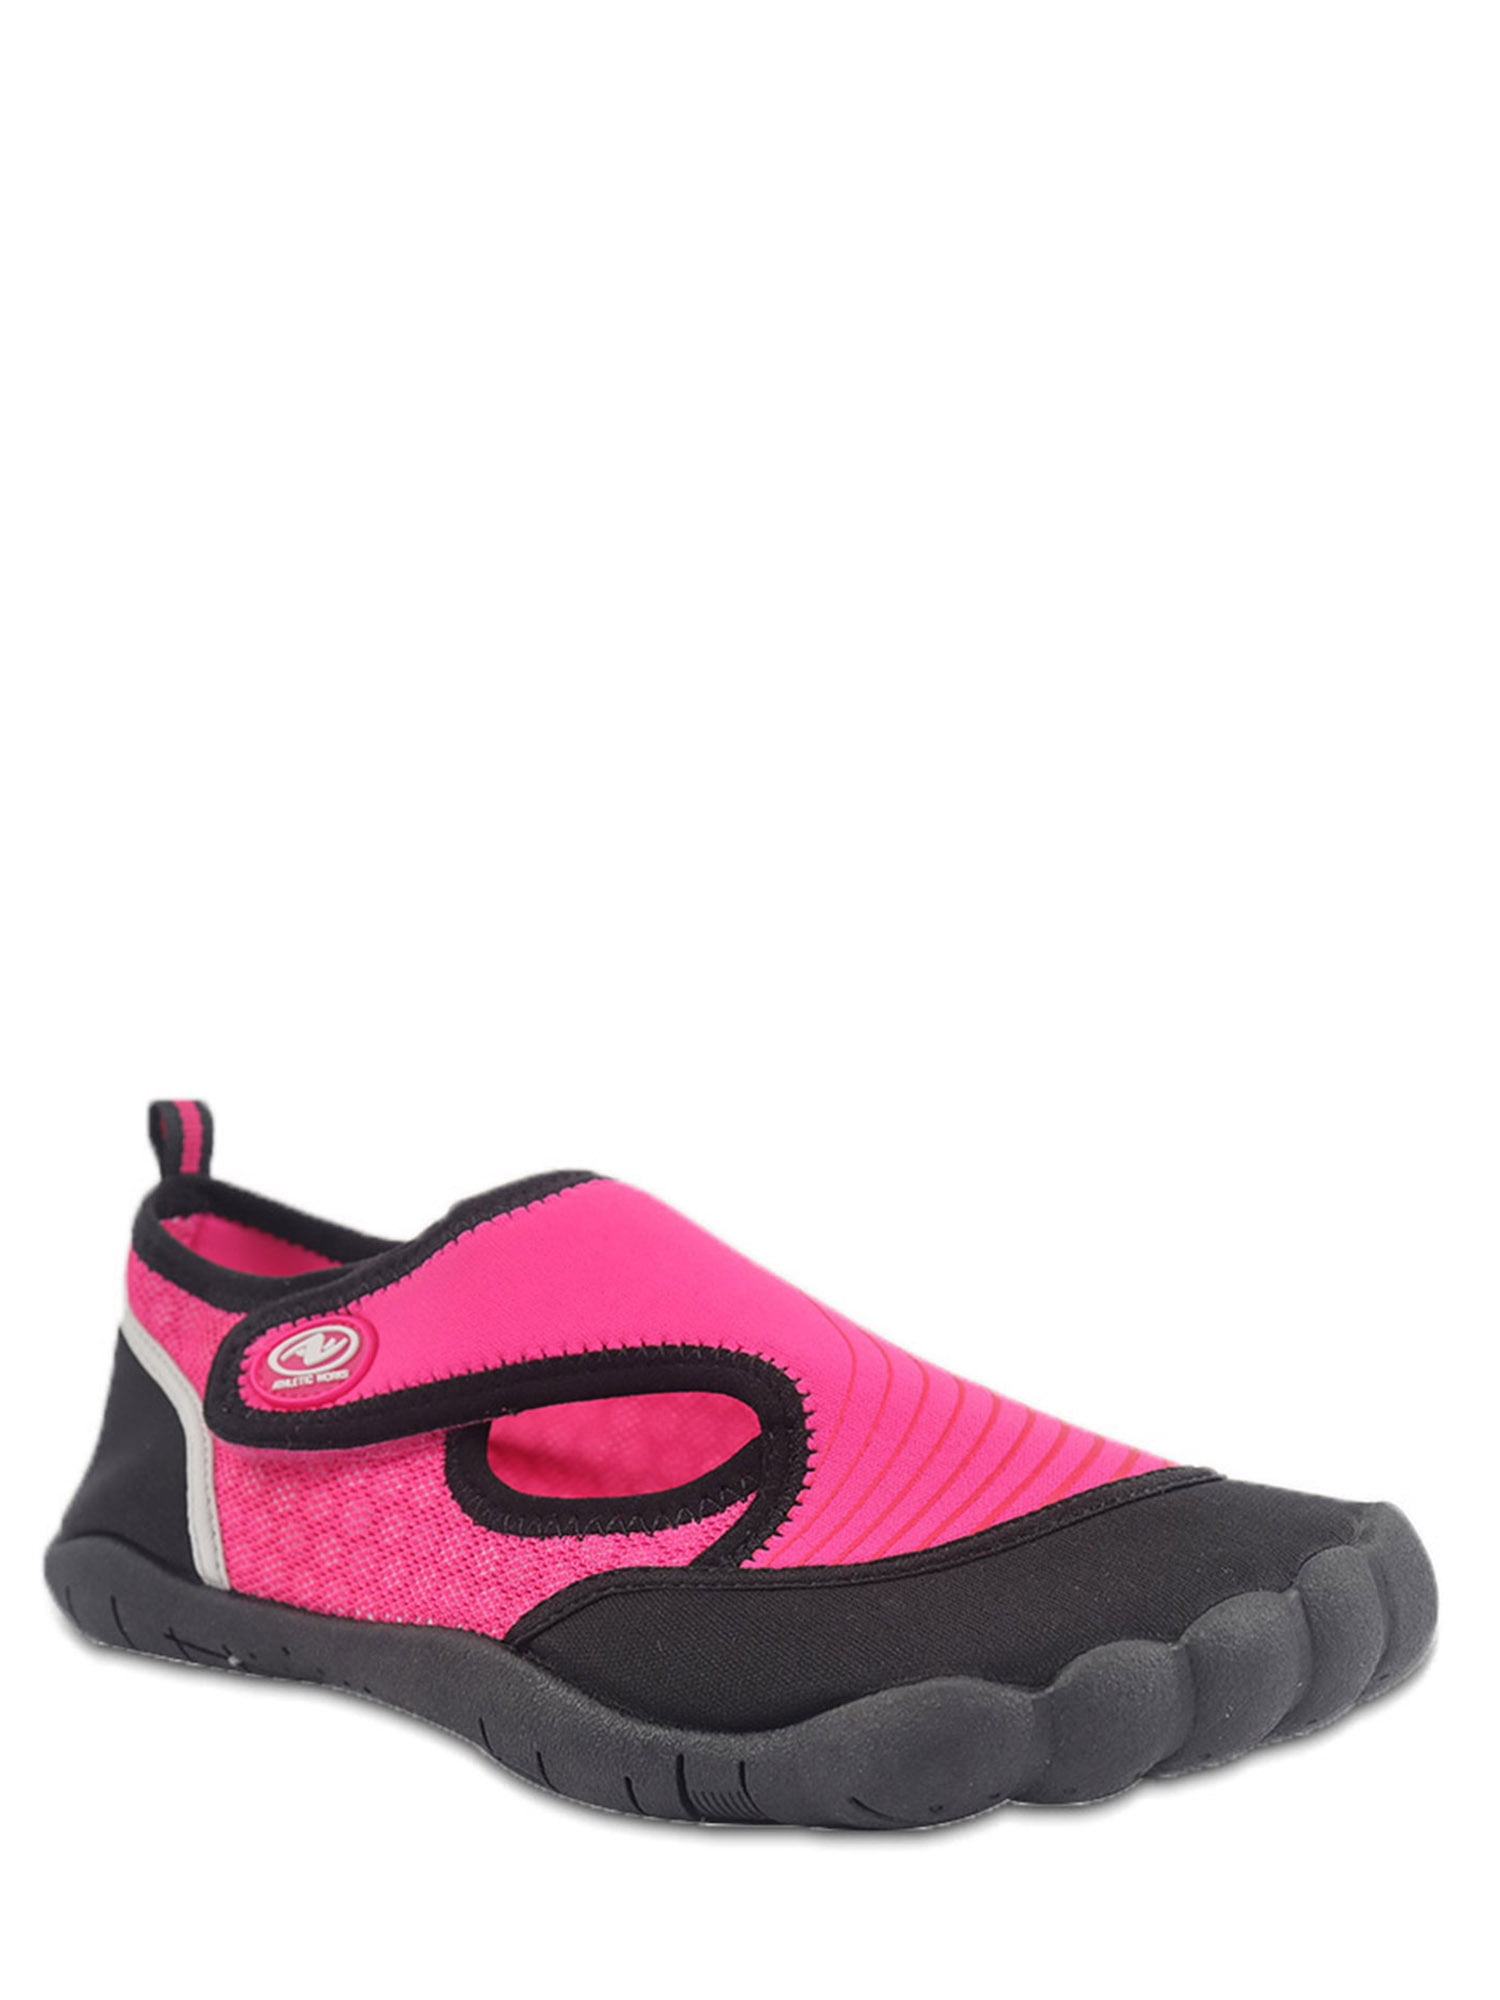 Athletic Works Women's Water Shoes - Walmart.com